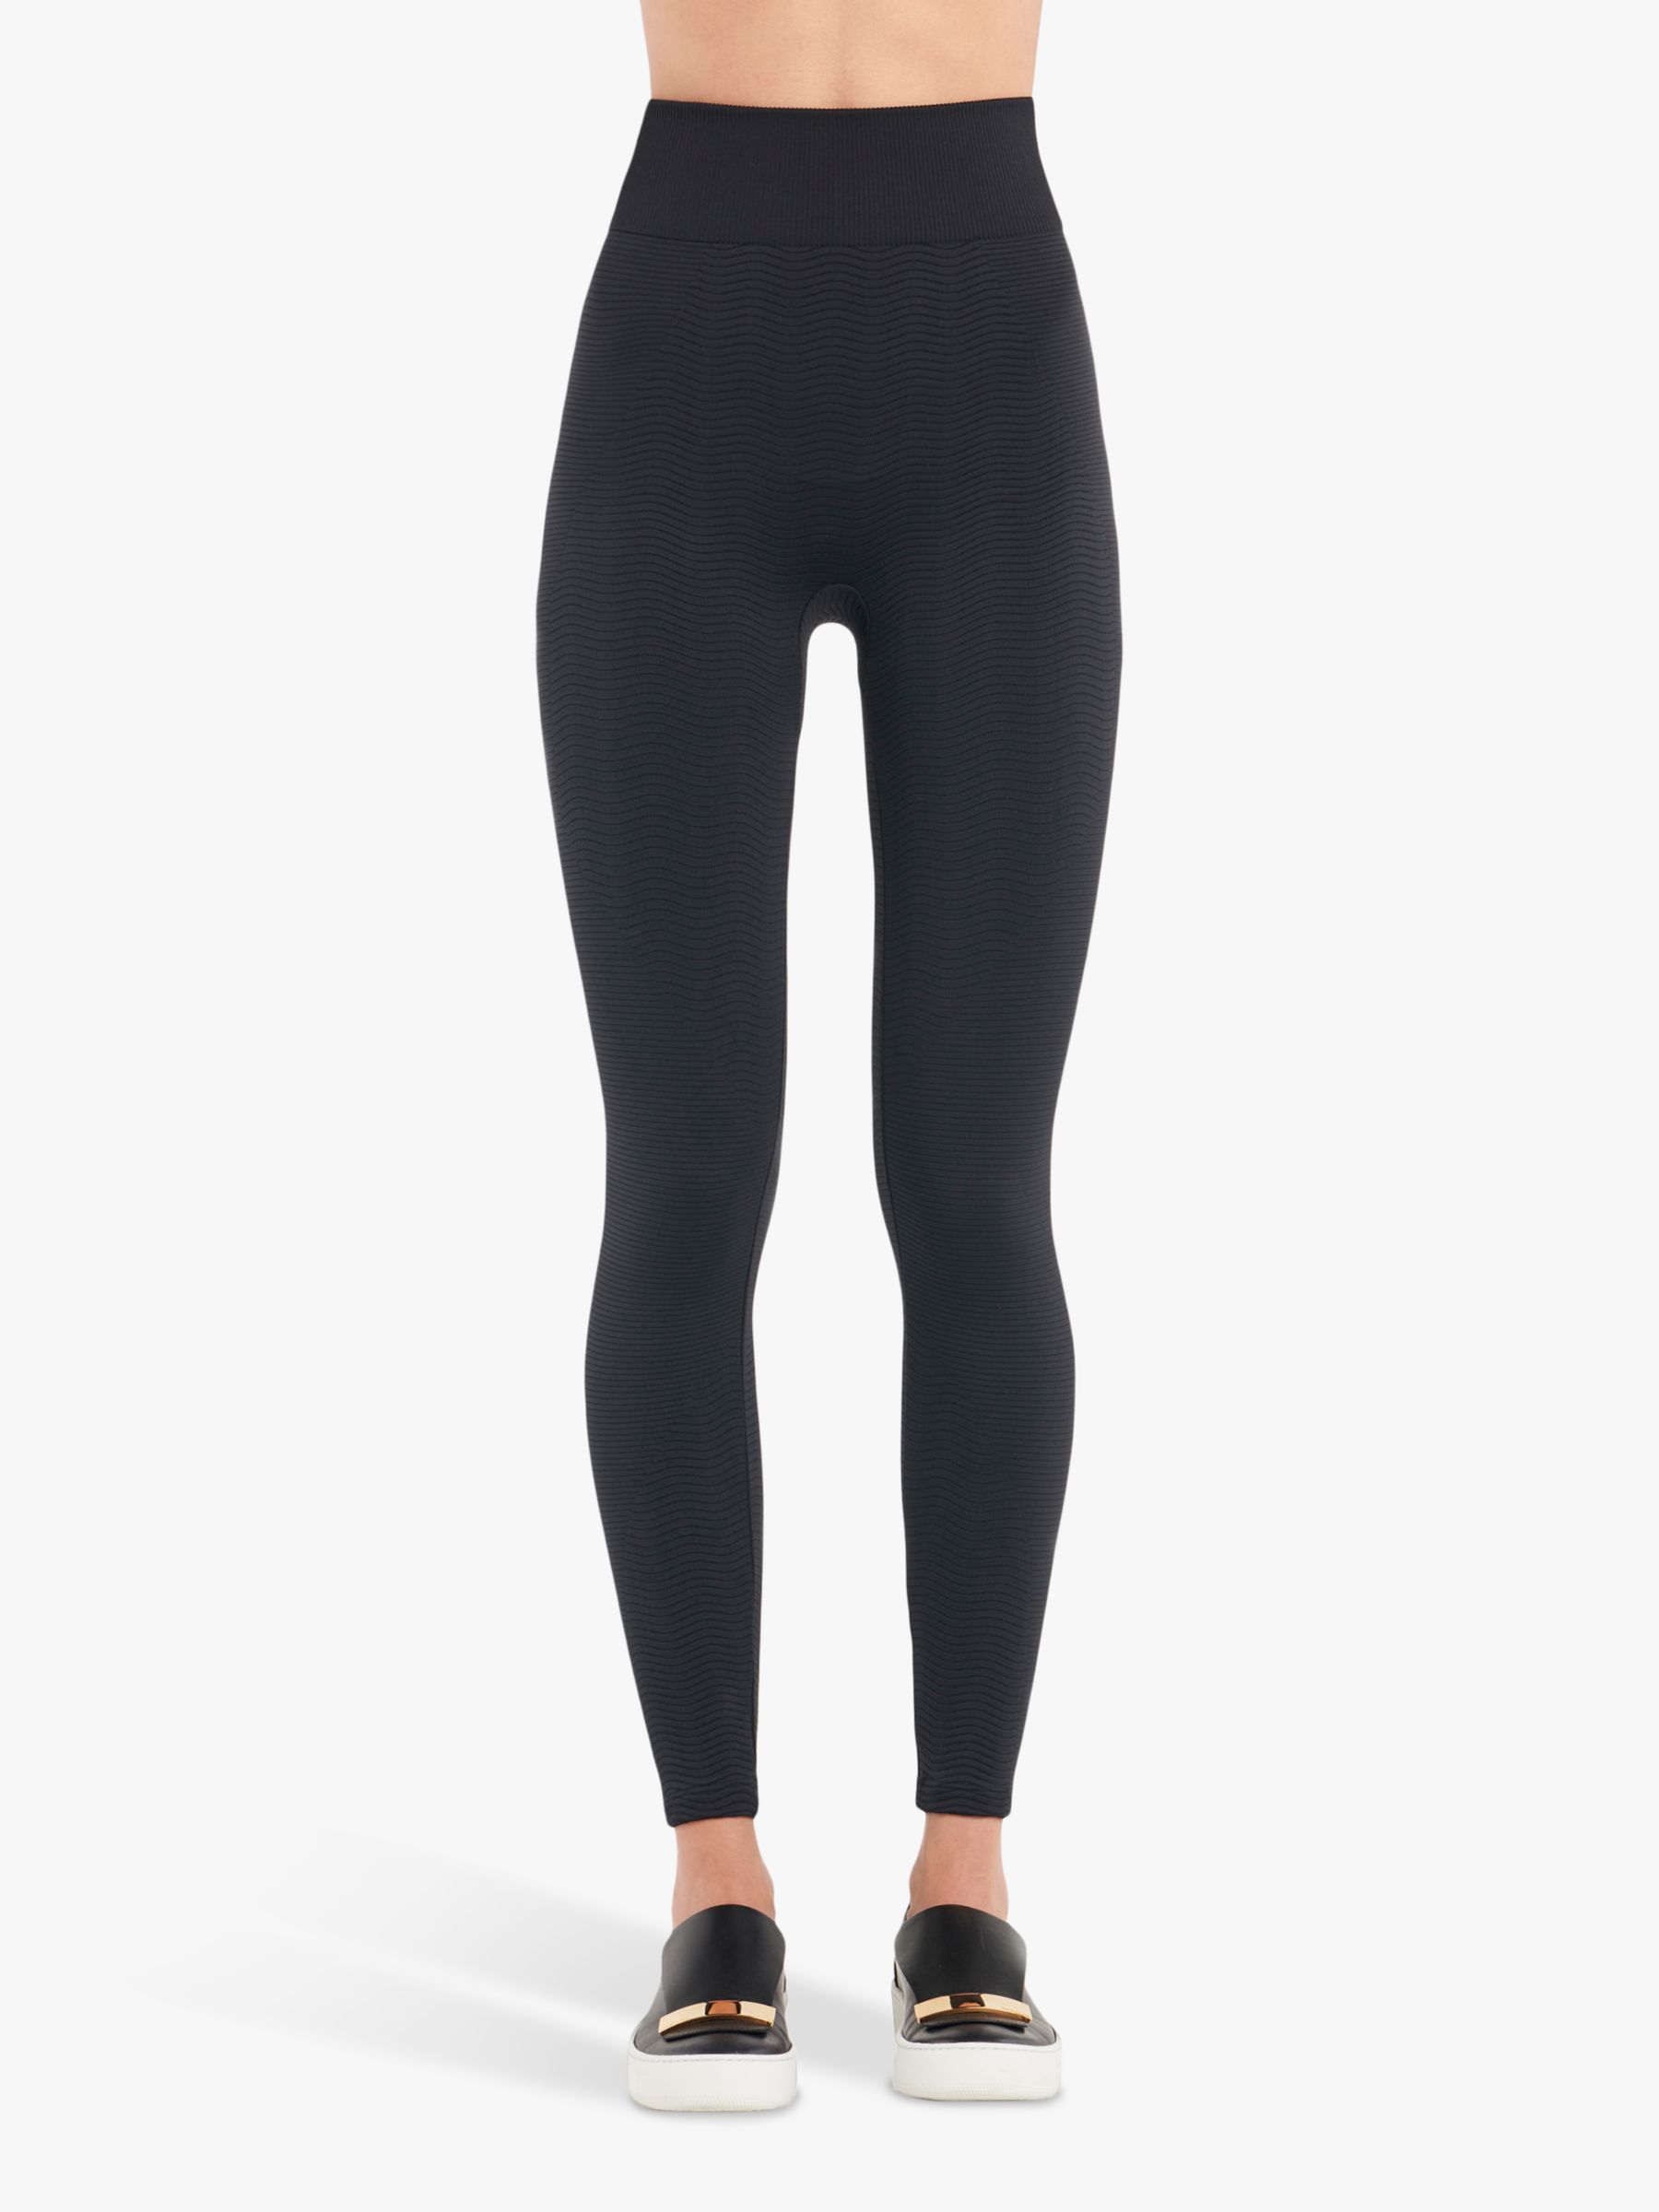 Wolford The Workout Leggings, Black, S